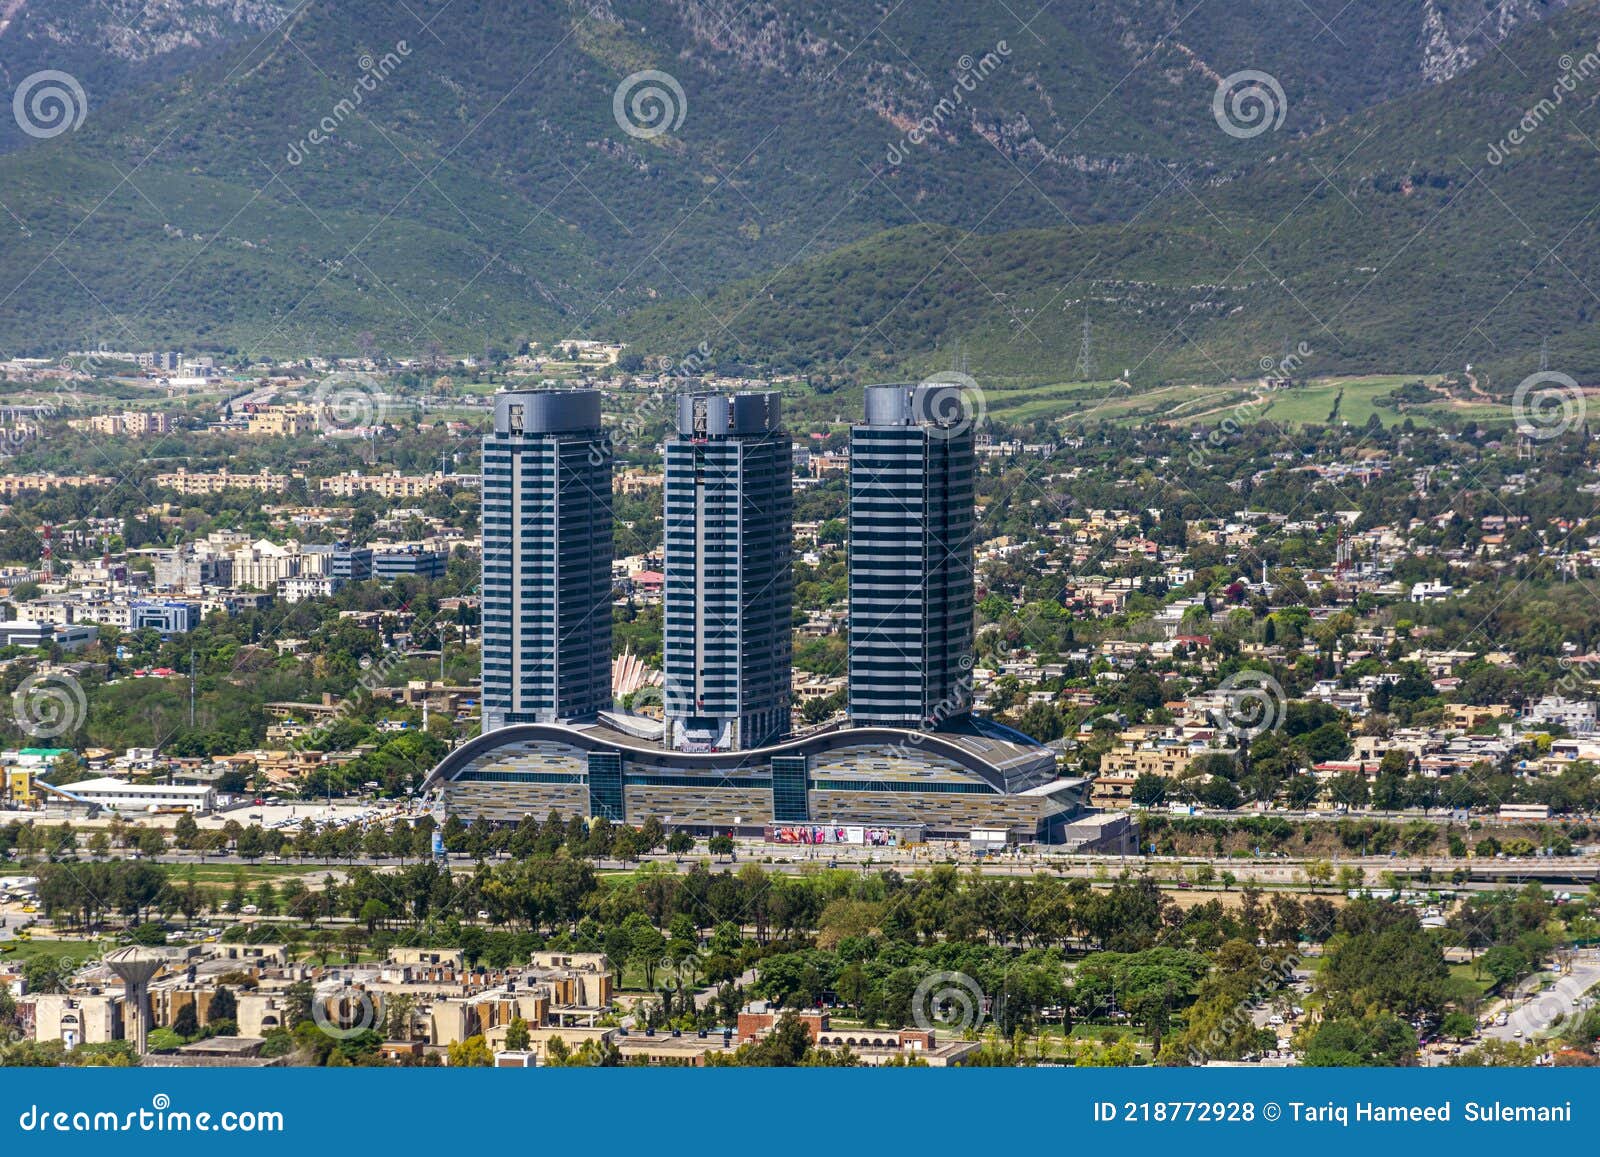 Islamabad City Xxx Video - Aerial View of the Centaurus Mall in Islamabad Pakistan, Landscapes and  Bird Eye View of Capital Stock Photo - Image of capital, territory:  218772928